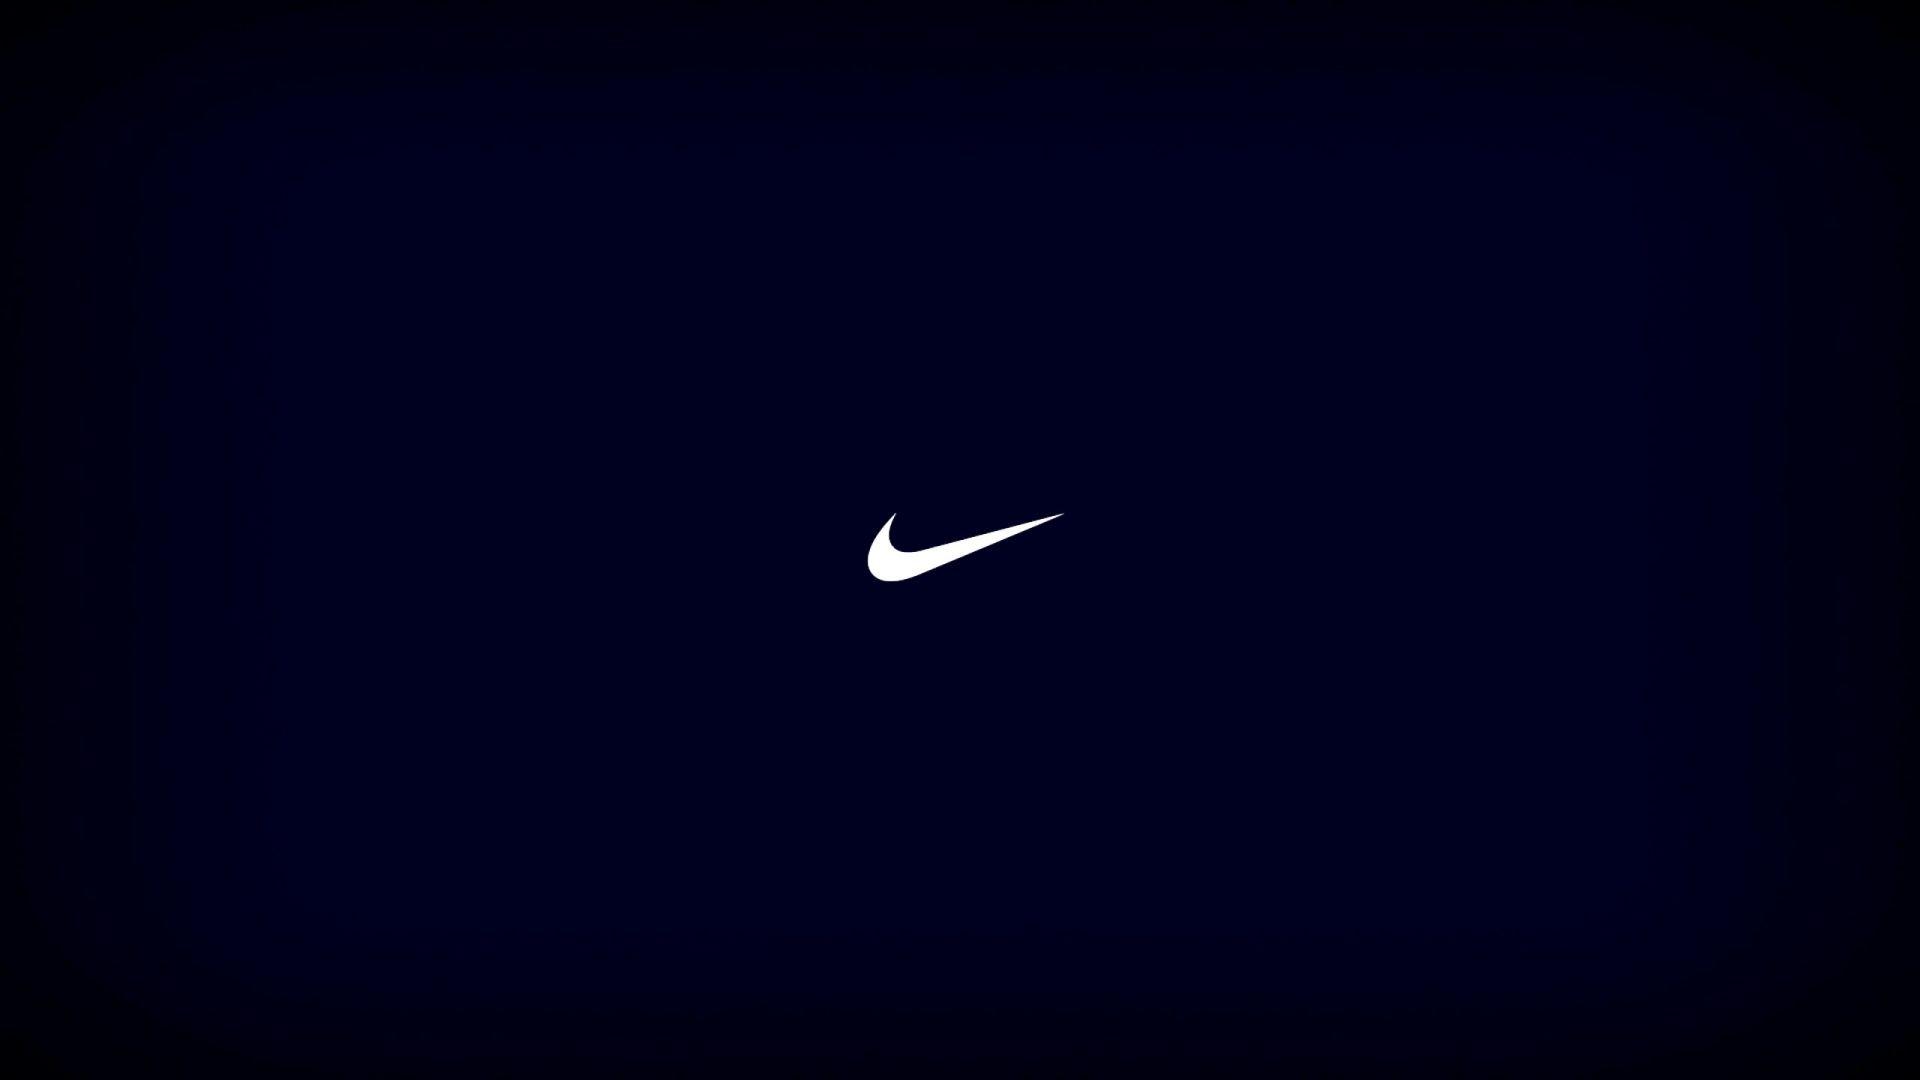 Blue and White Nike Logo - Nike Logo Backgrounds - Wallpaper Cave